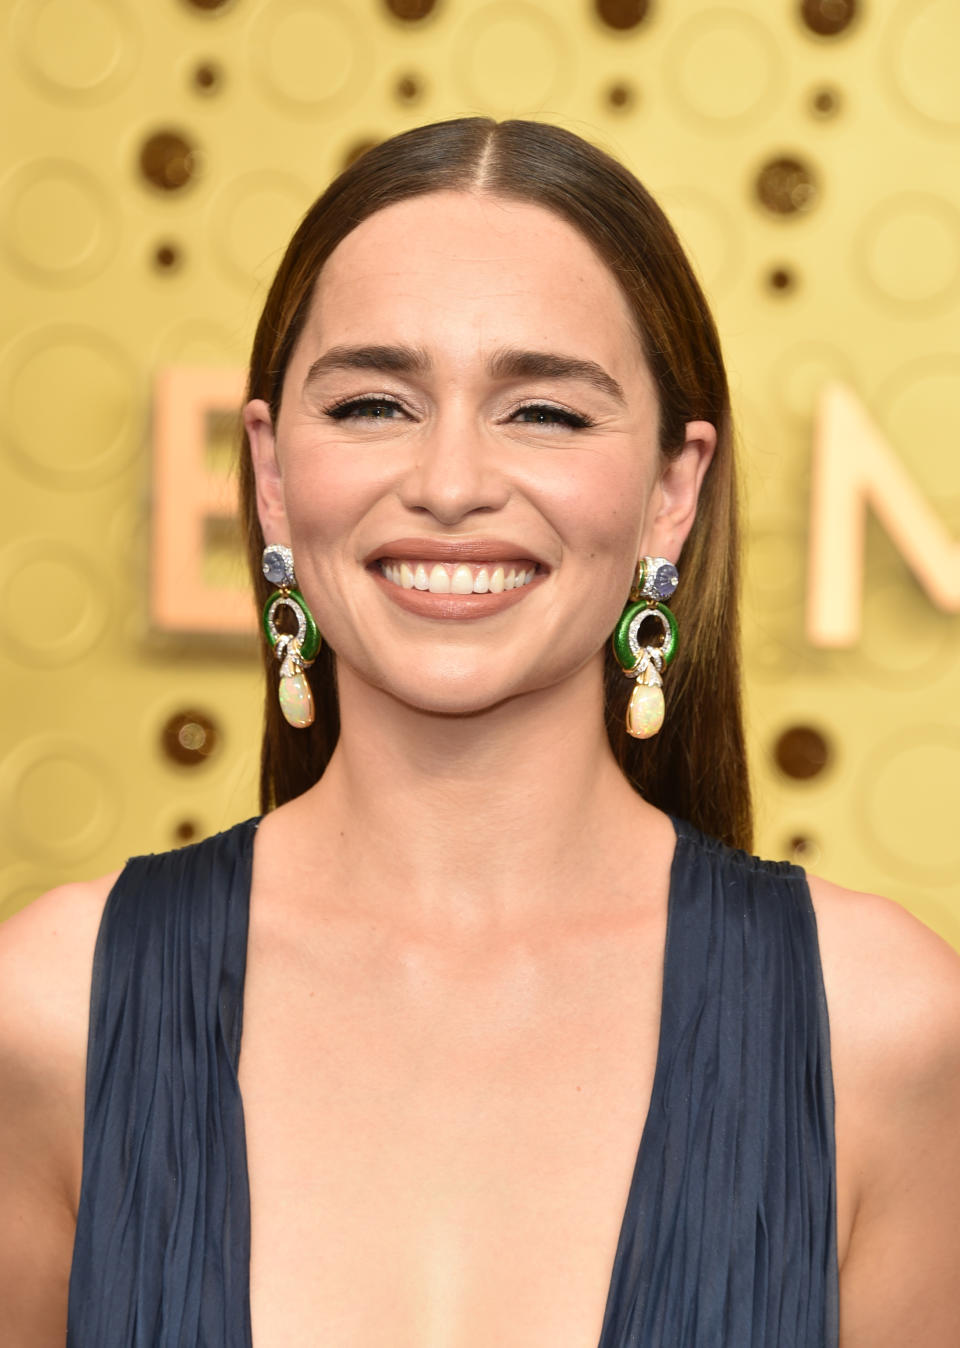 LOS ANGELES, CALIFORNIA - SEPTEMBER 22:  Emilia Clarke attends the 71st Emmy Awards at Microsoft Theater on September 22, 2019 in Los Angeles, California. (Photo by John Shearer/Getty Images)